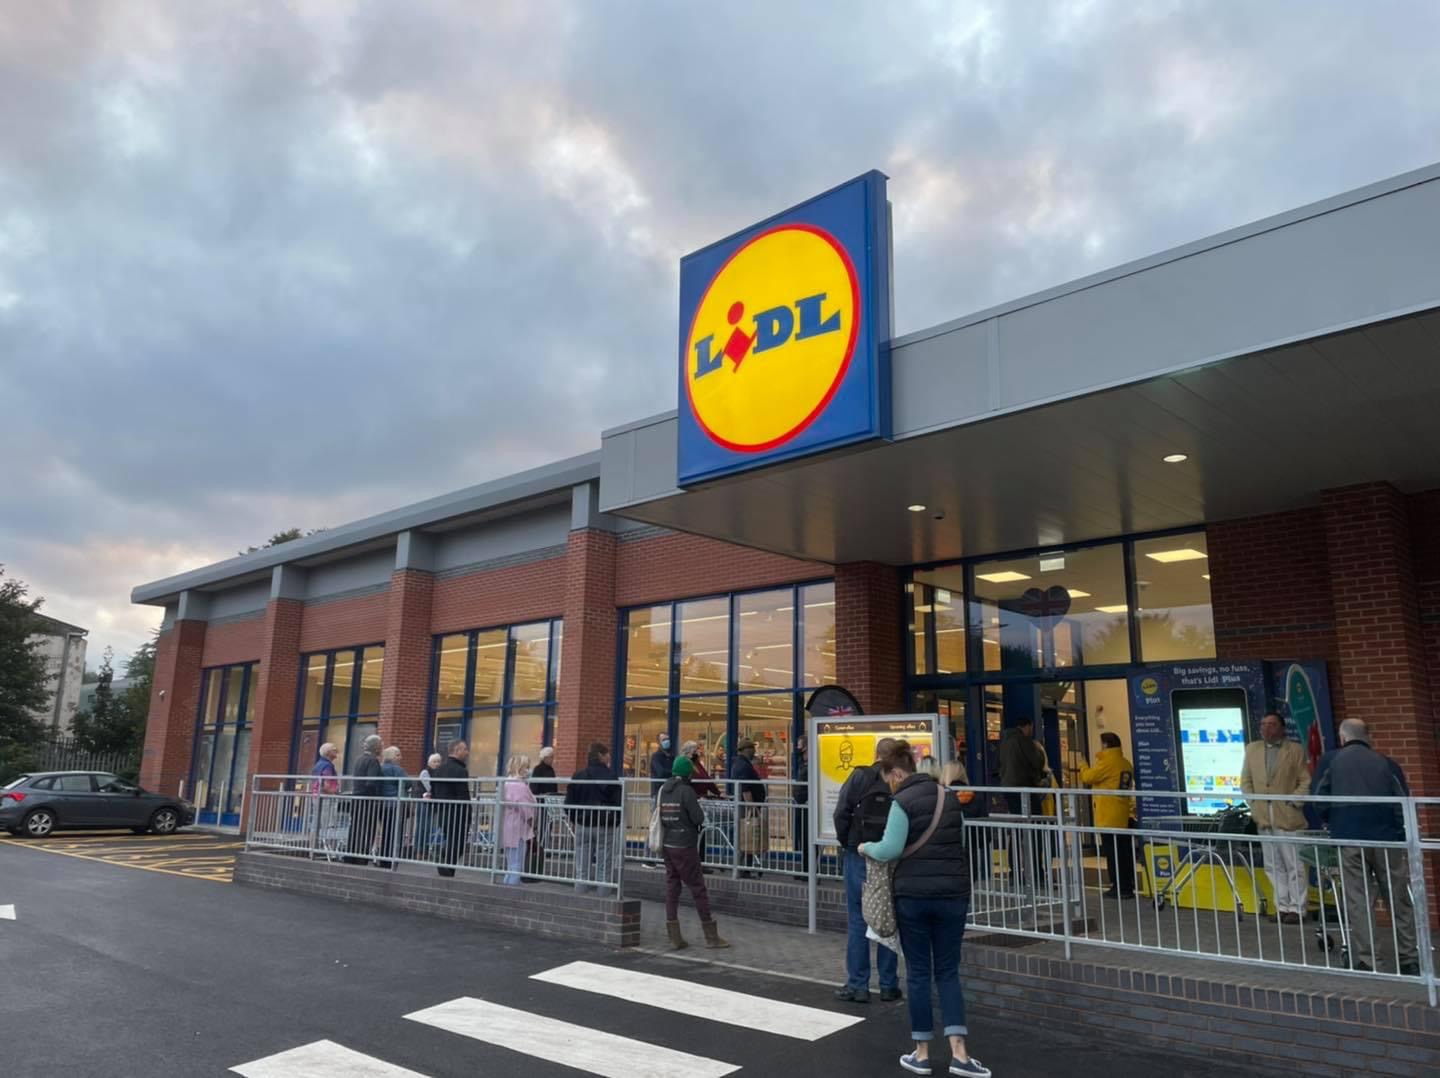 NEWS | Local community forum submits petition against plans for a new Lidl superstore and urges council to refuse planning